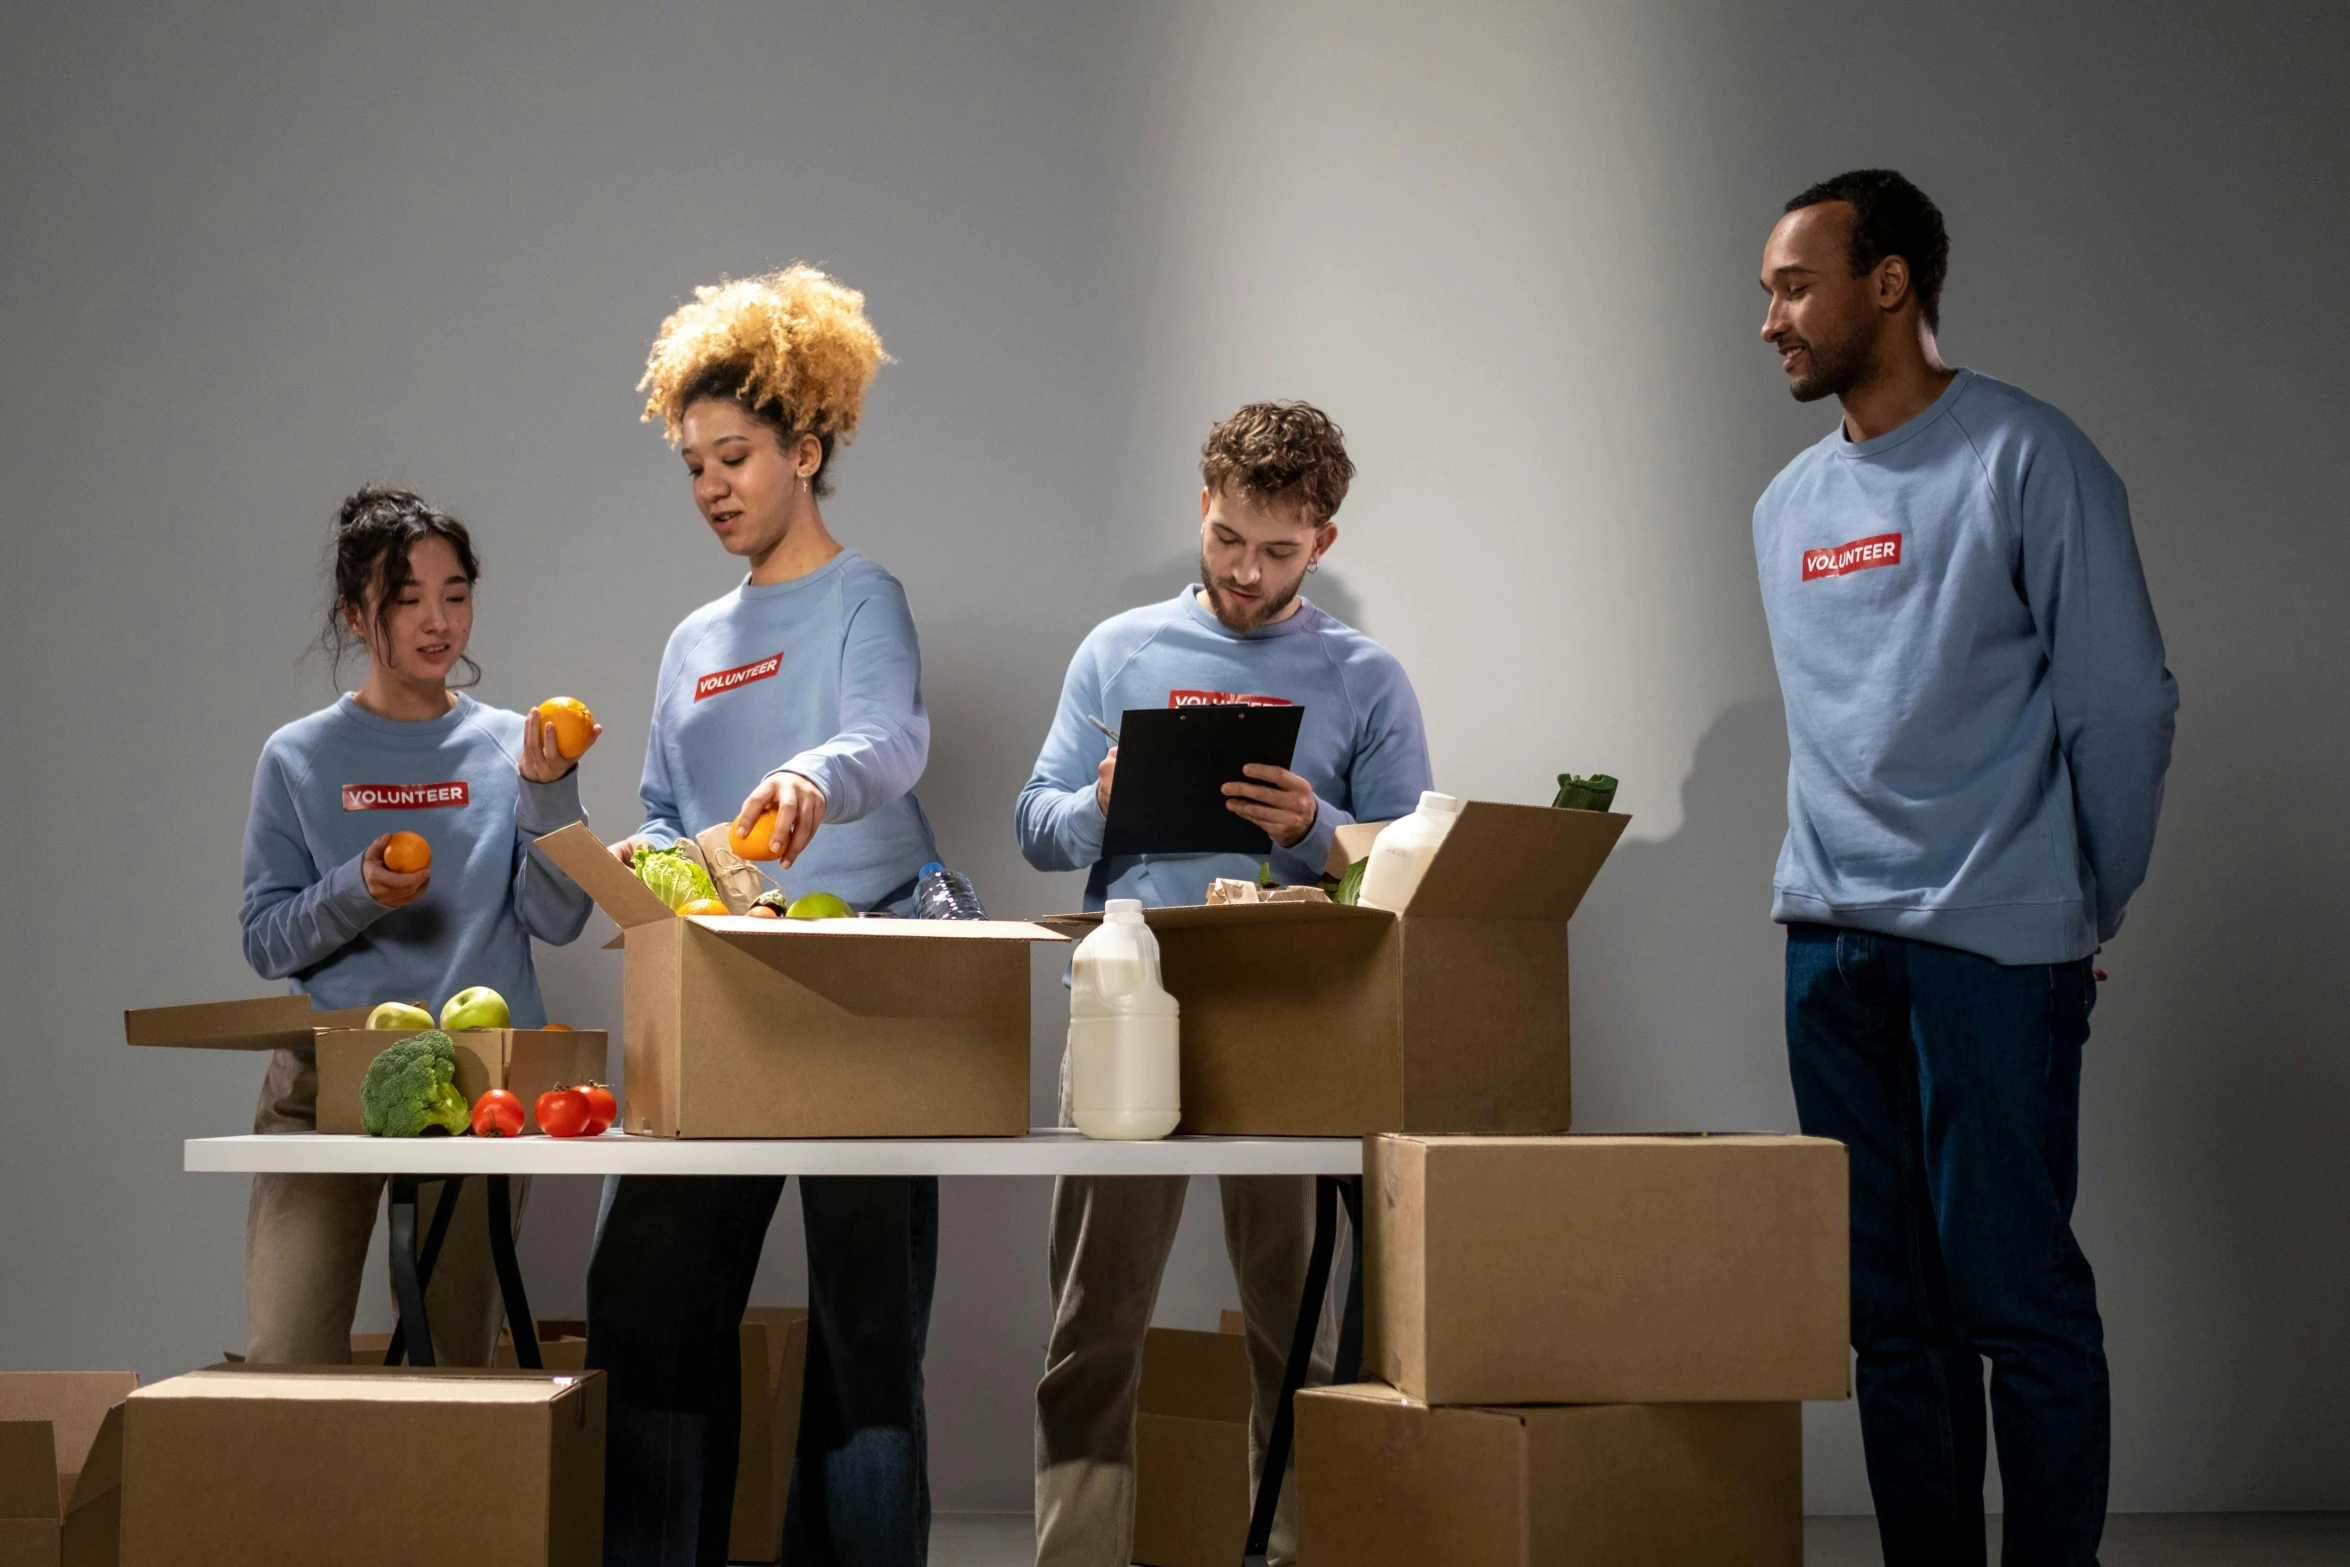 a group of people standing around a table with boxes, product shoot, getting groceries, avatar image, performance